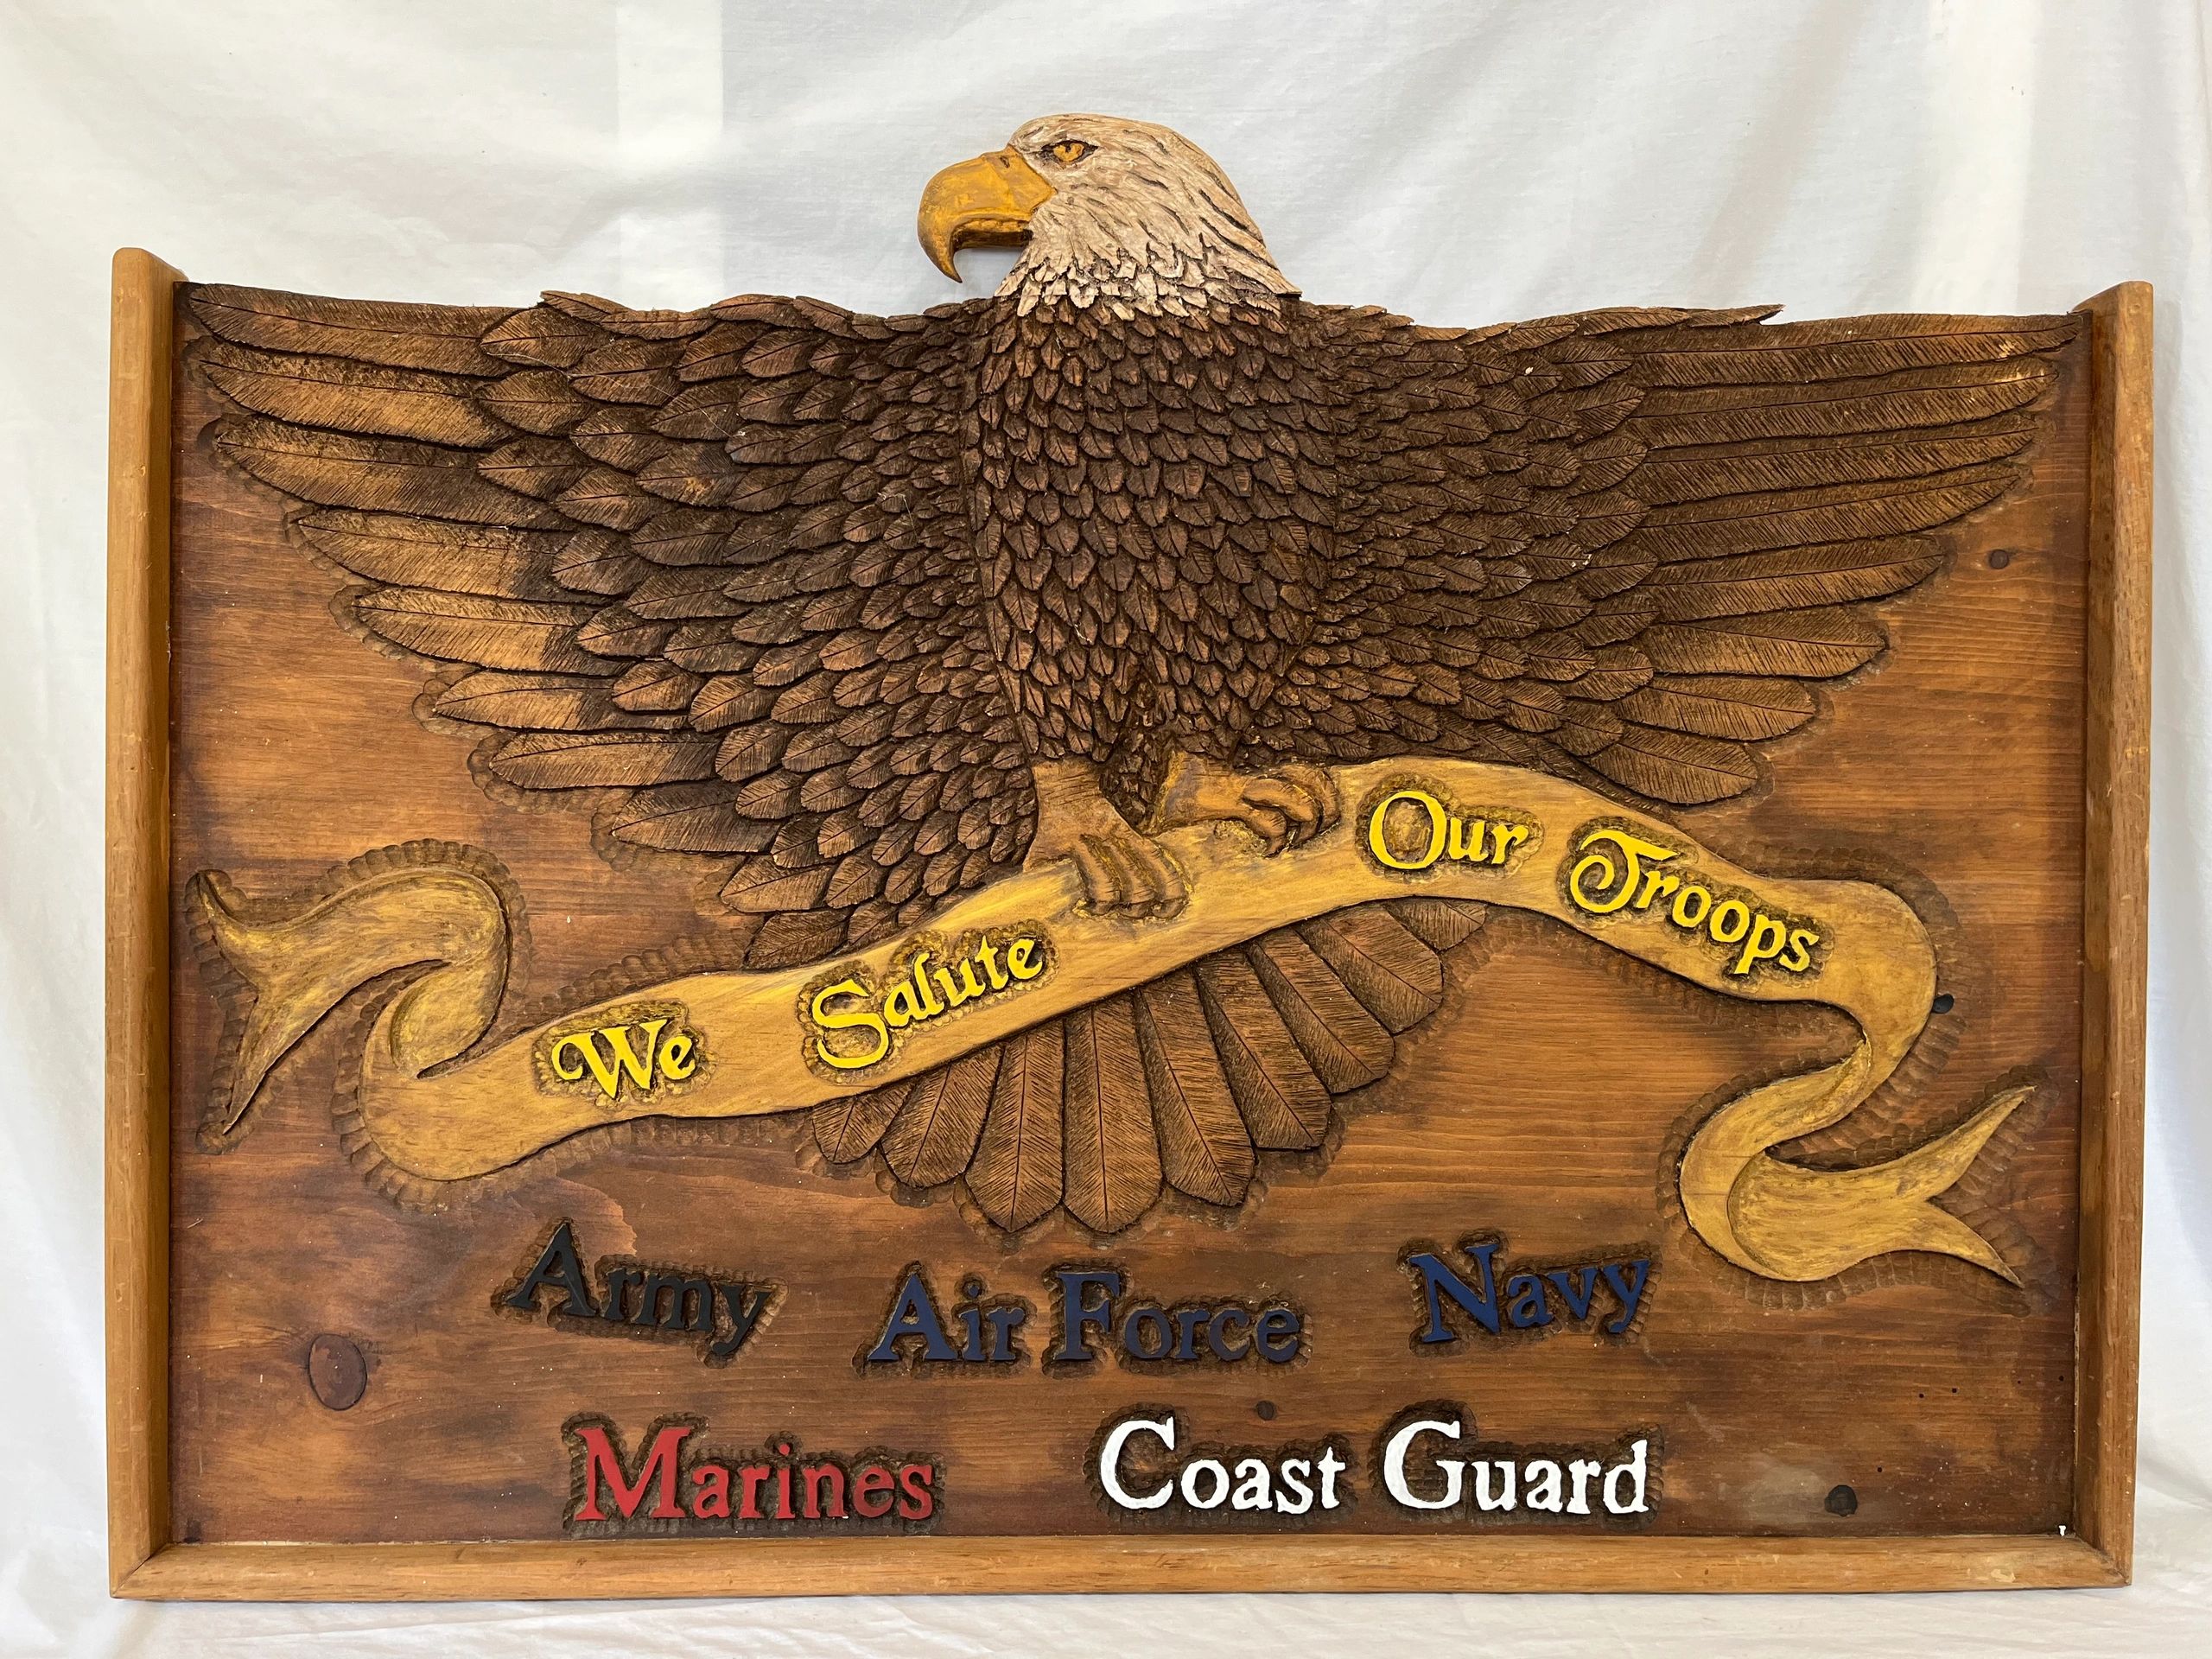 Wood Carving Stating "We Salute to Our Troops"